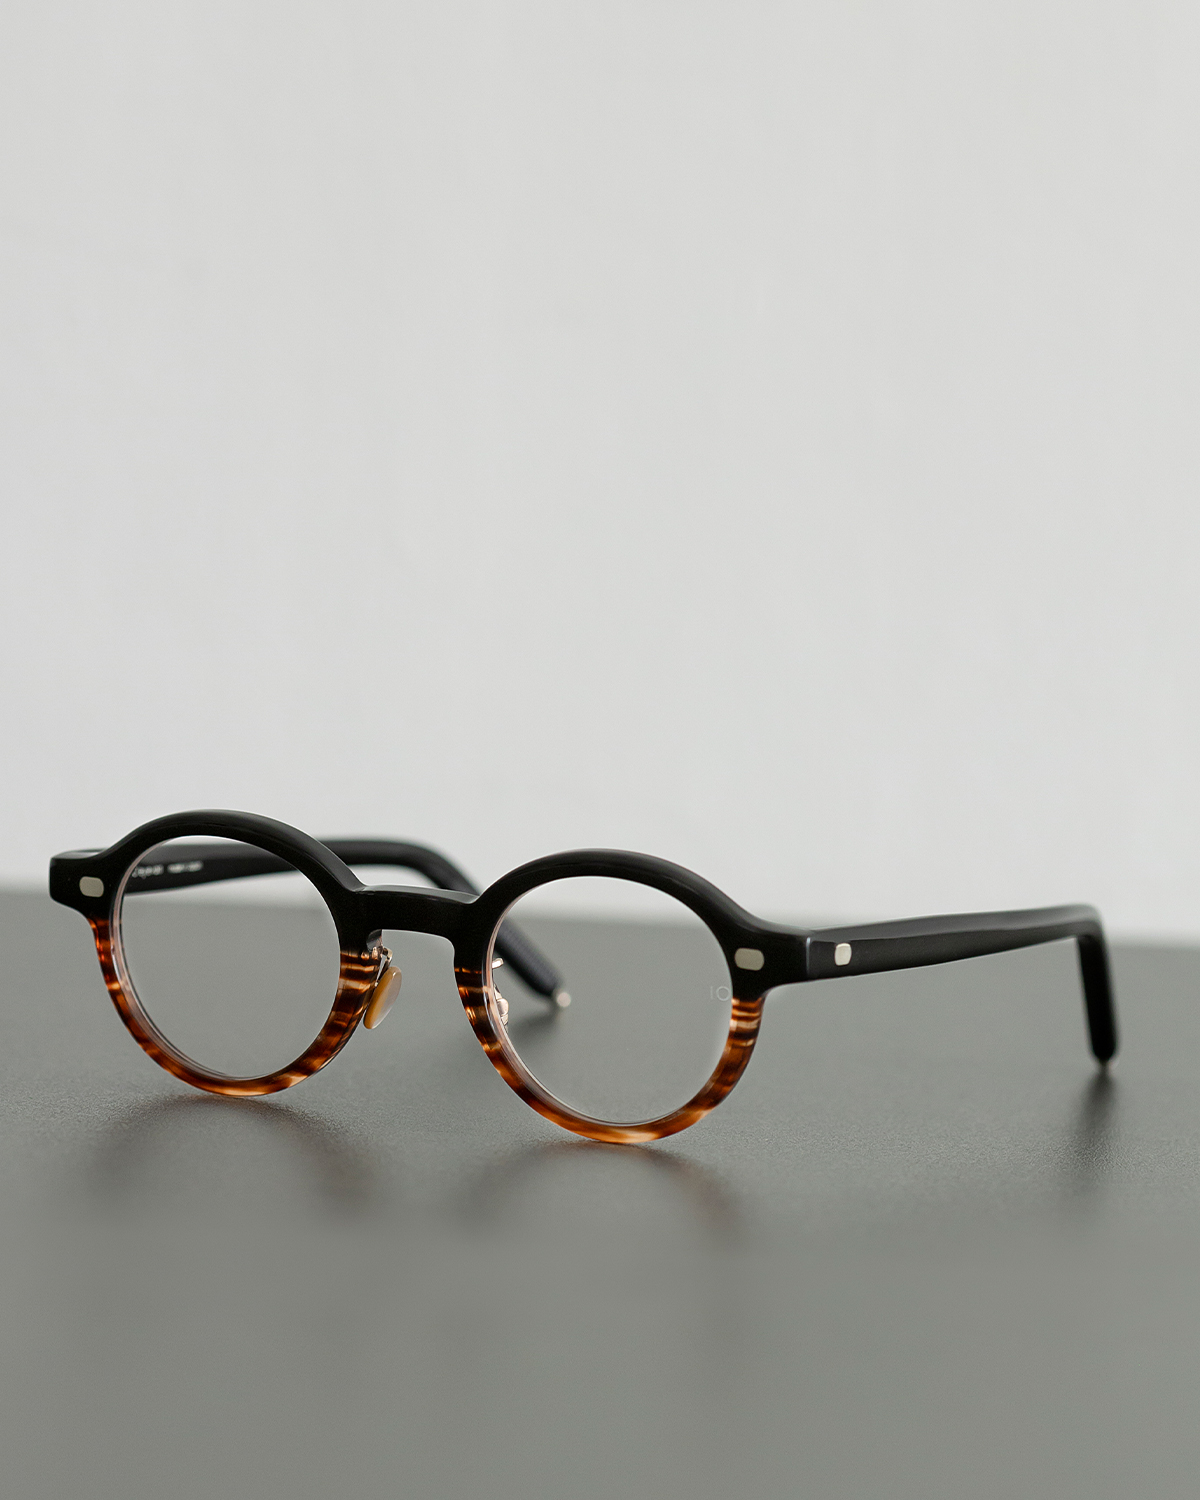 10 eyevan｜no.5-Ⅲ FR - 1013S｜PRODUCT｜Continuer Inc.｜メガネ